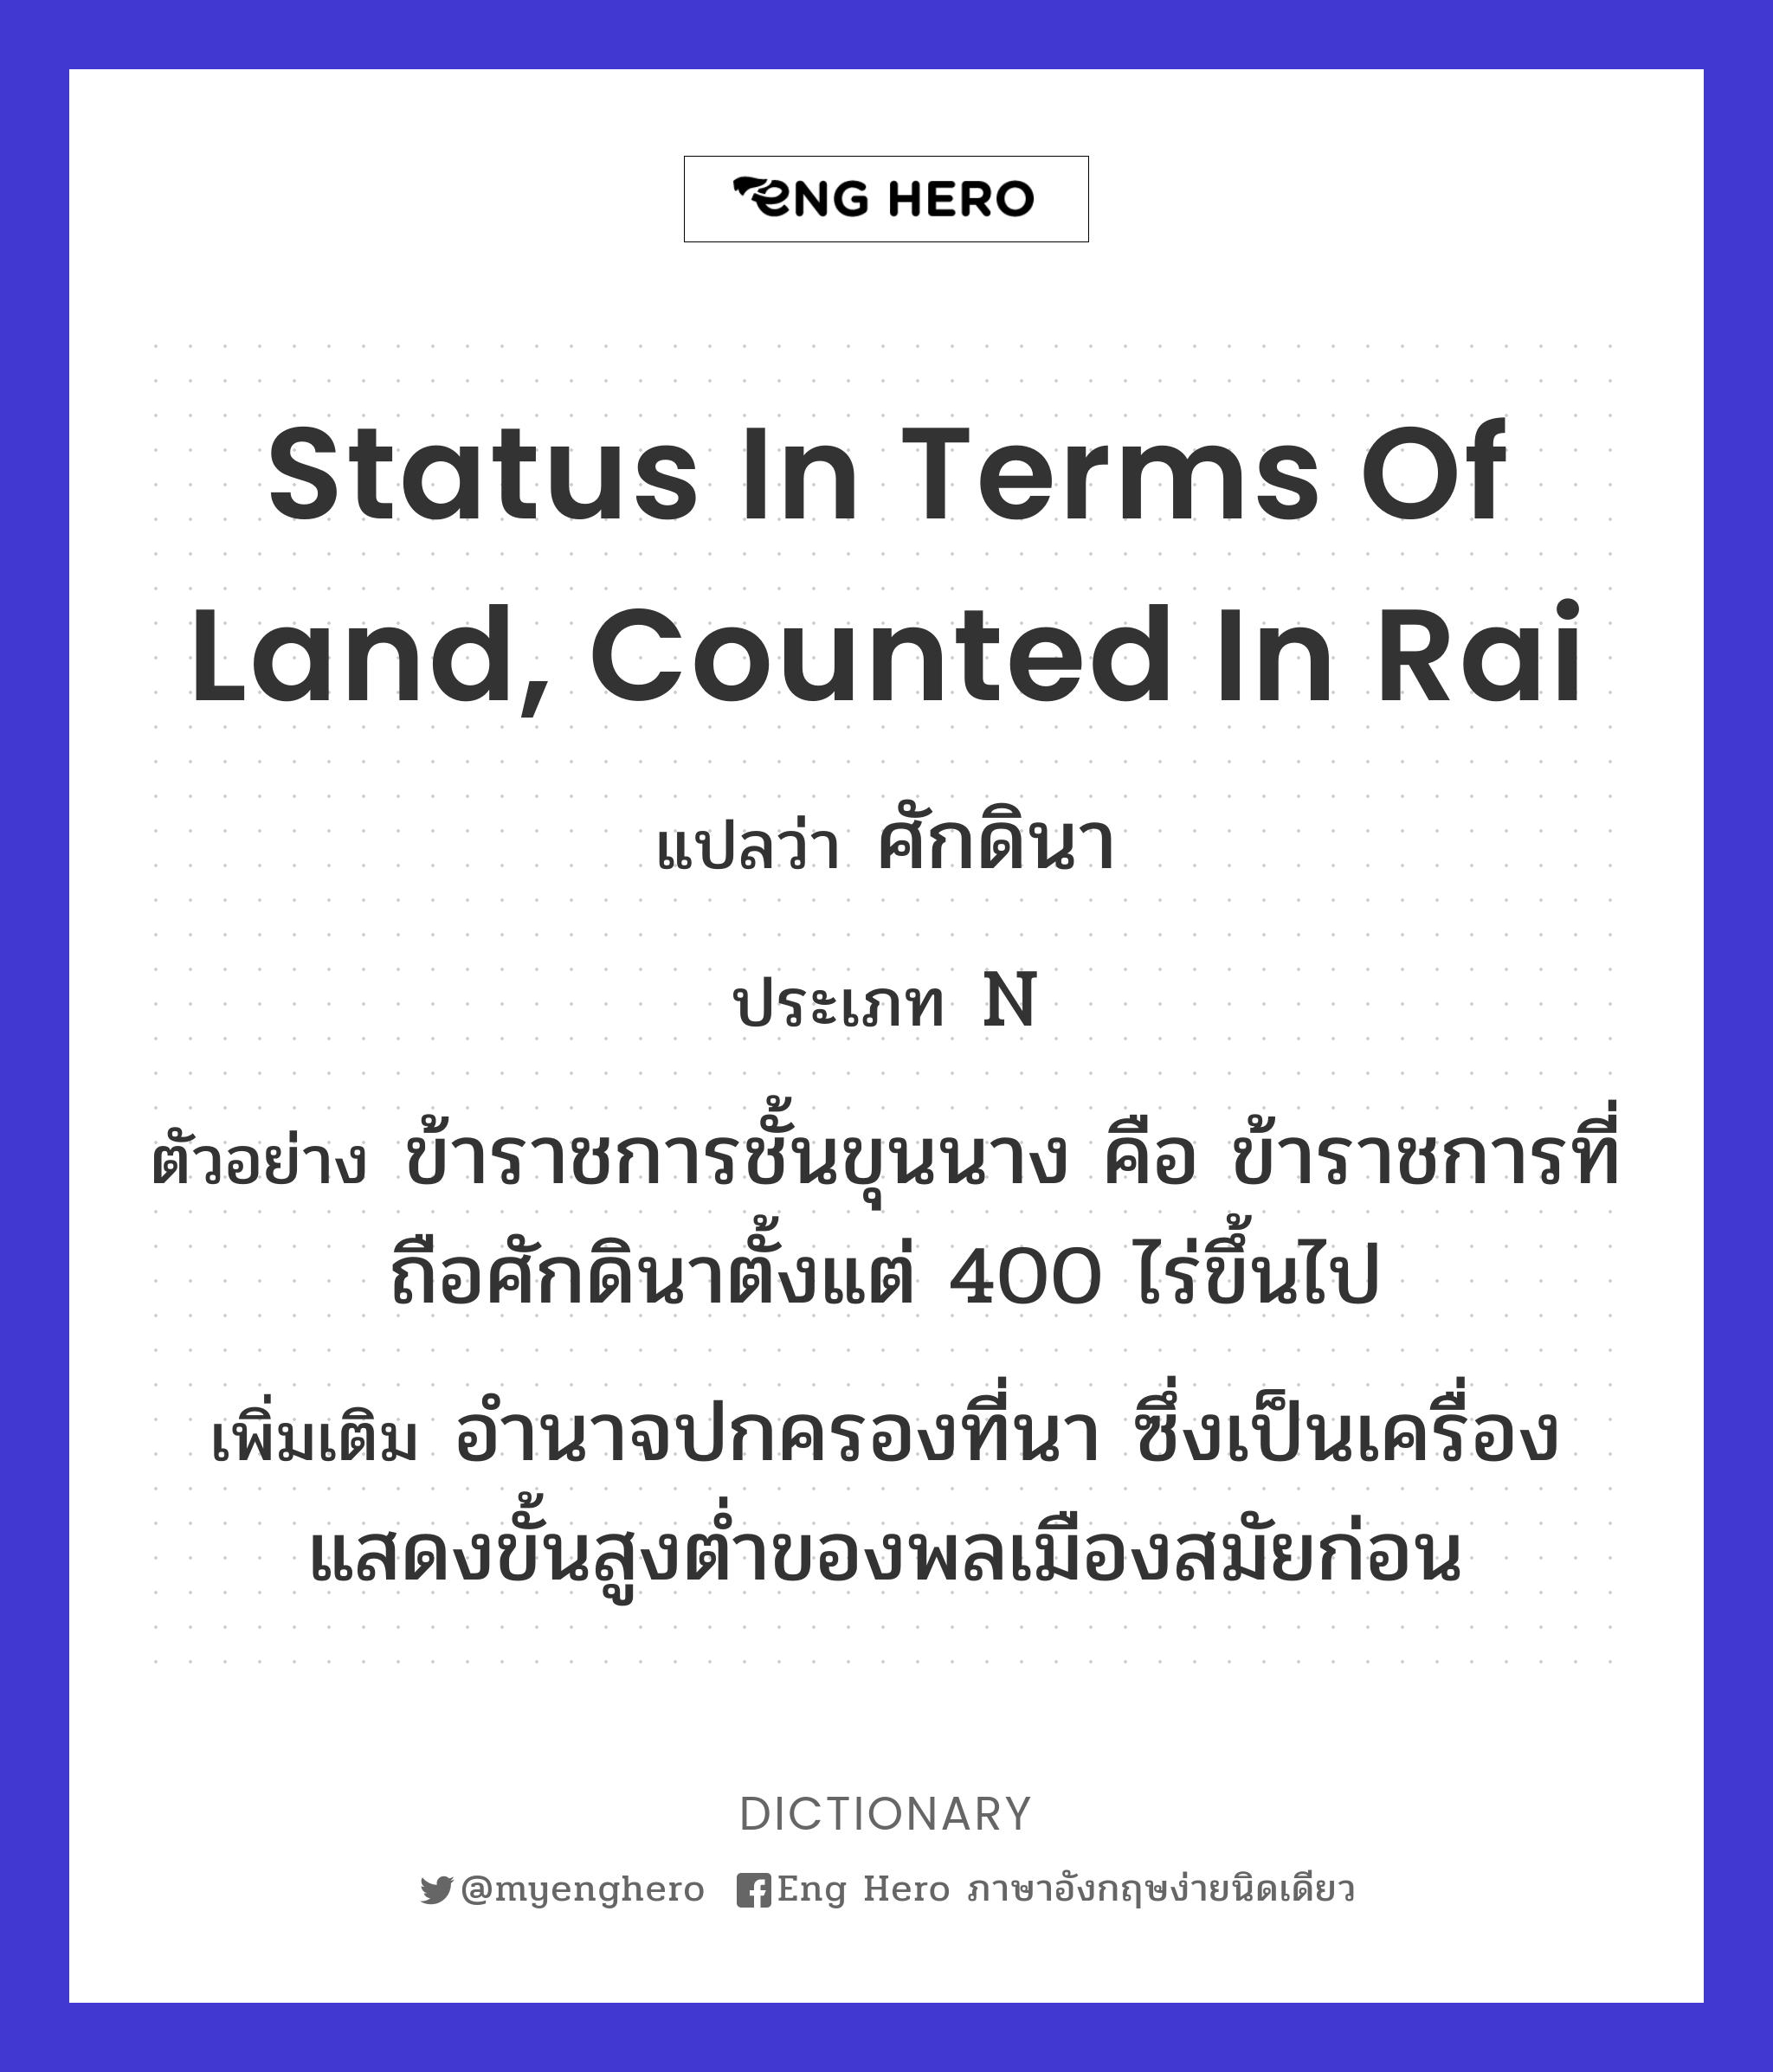 status in terms of land, counted in rai